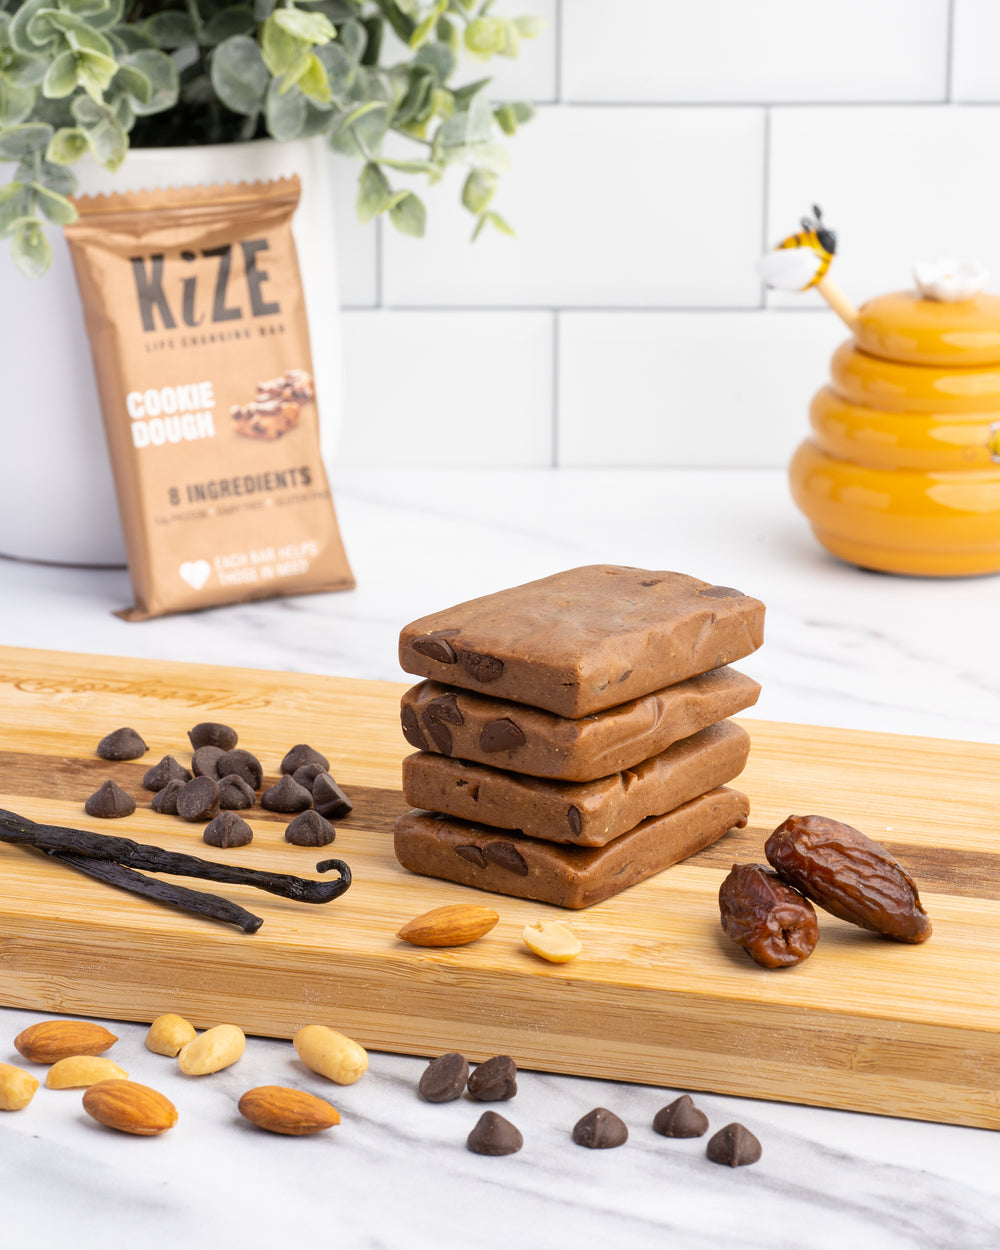 Cookie Dough Kize Protein Bar Stacked on Counter